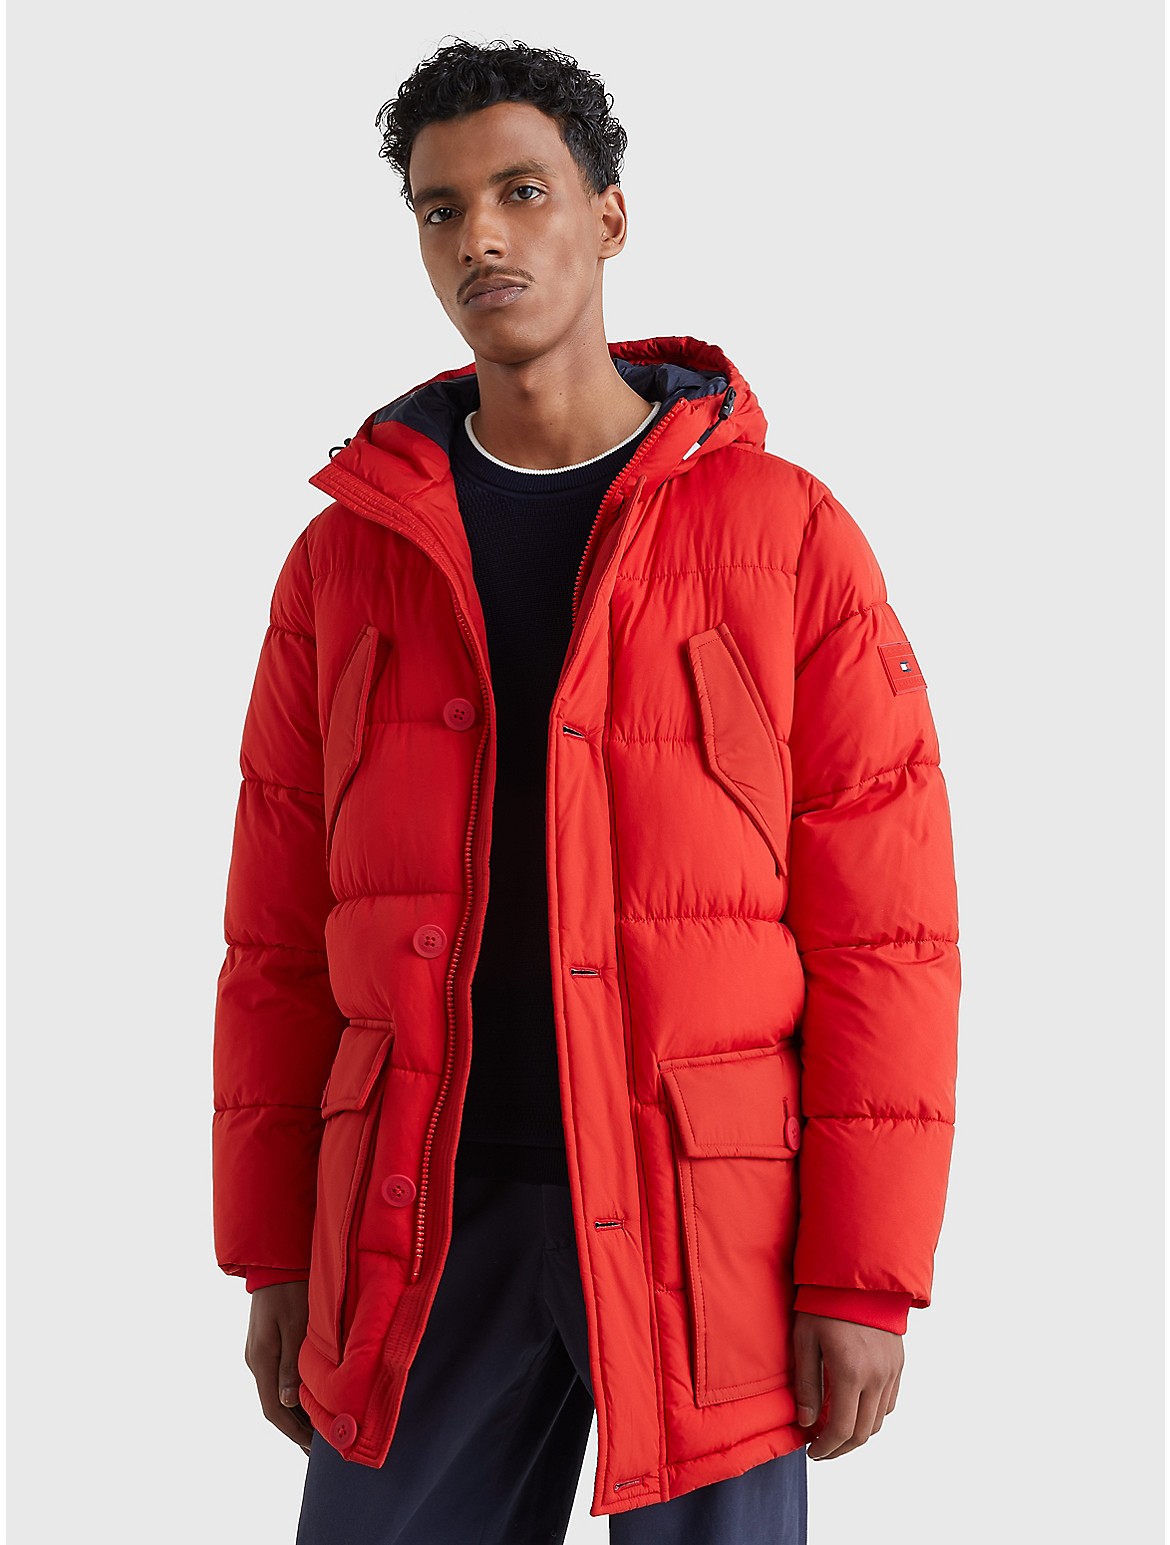 Tommy Hilfiger Men's Recycled Hooded Parka